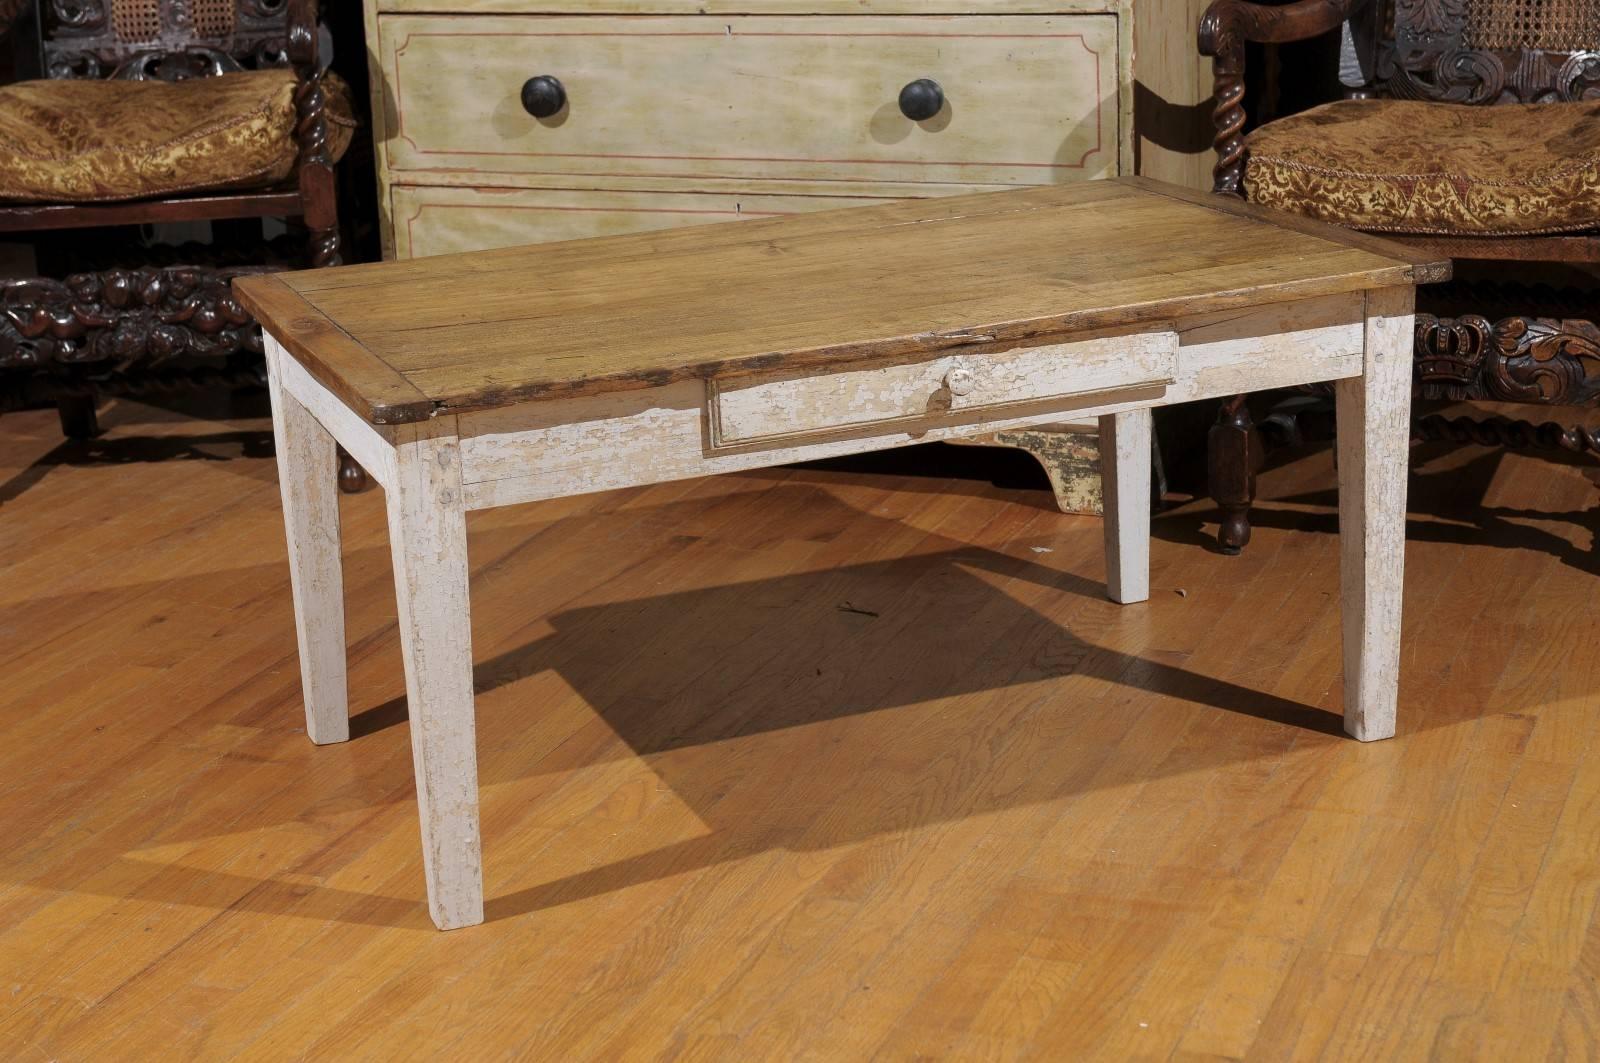 This French coffee table has a pine top with a single drawer. It is durable but very charming and would go well in most home decor styles.